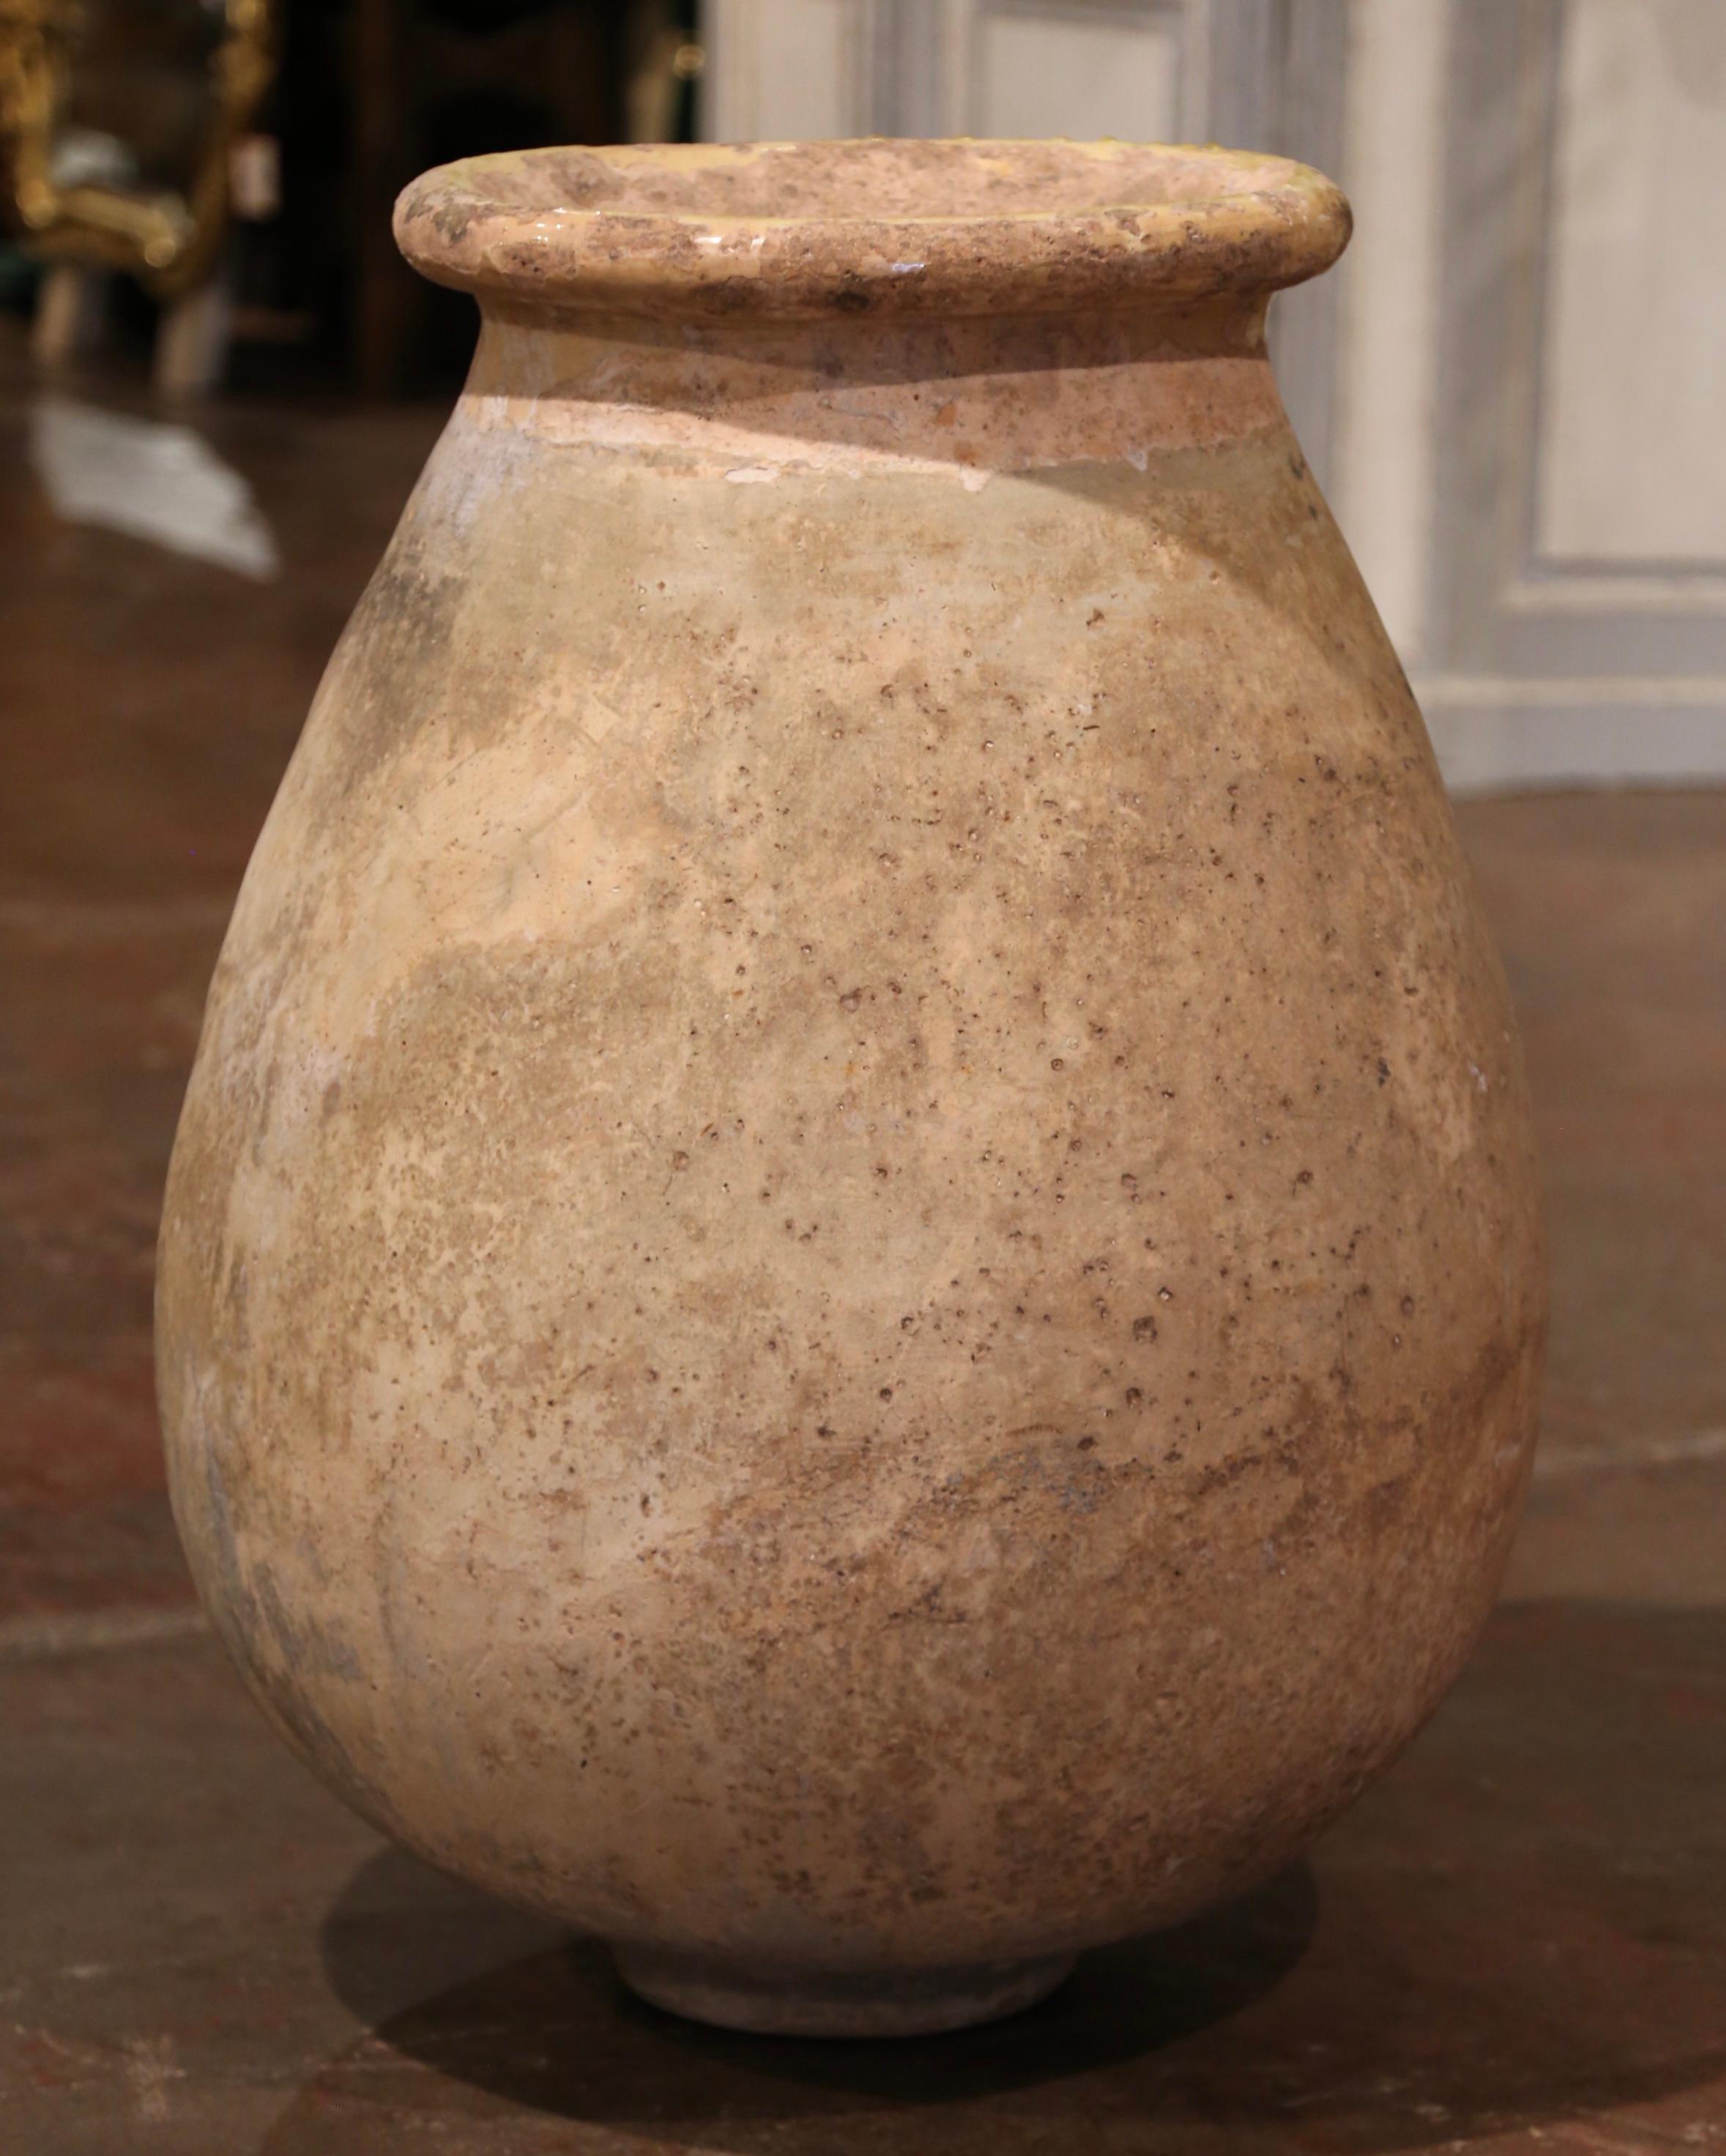 This large, antique earthenware olive jar was created in Southern France, circa 1850. Made of blond clay and neutral in color, the terracotta vase has a traditional round shape. The rustic, time-worn pot features a yellow glaze around the neck and